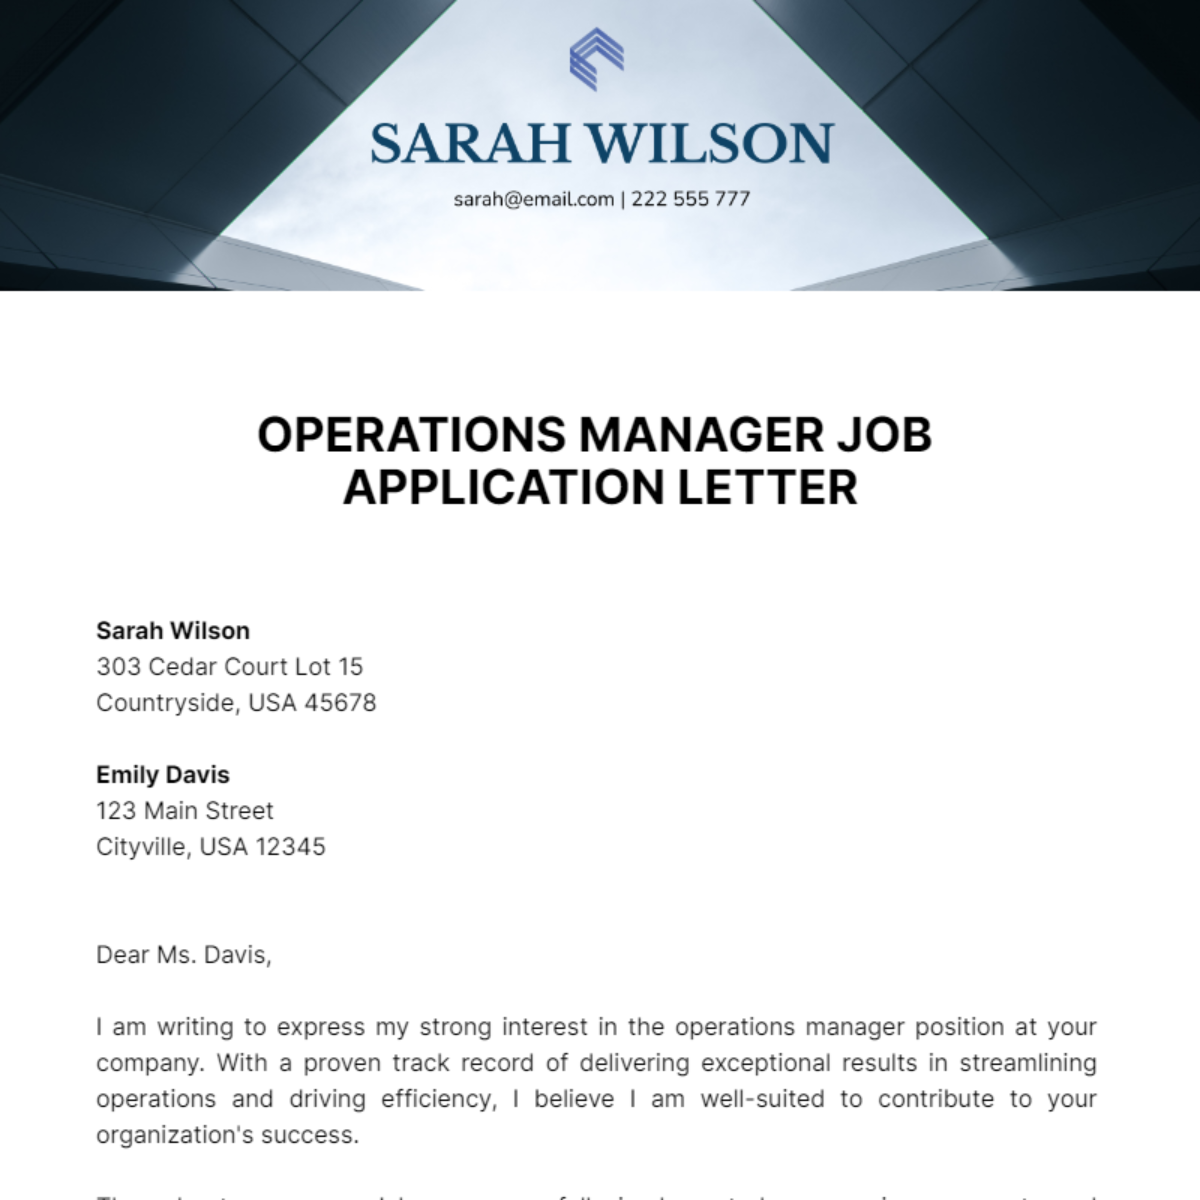 Operations Manager Job Application Letter  Template